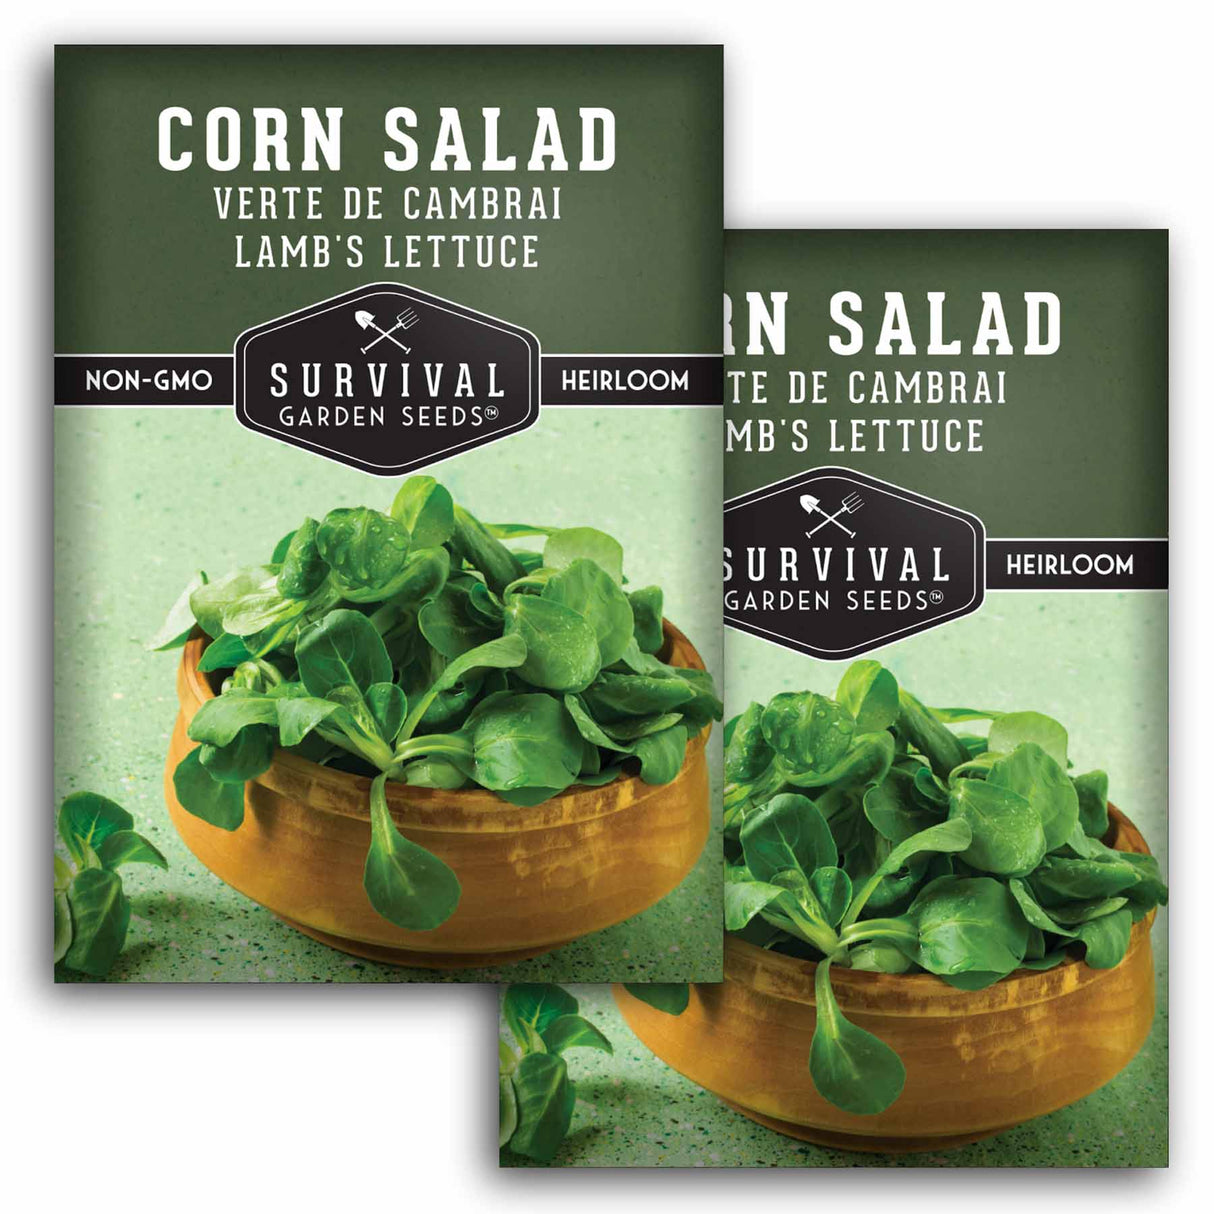 2 packets of Corn Salad Lamb's Lettuce seeds